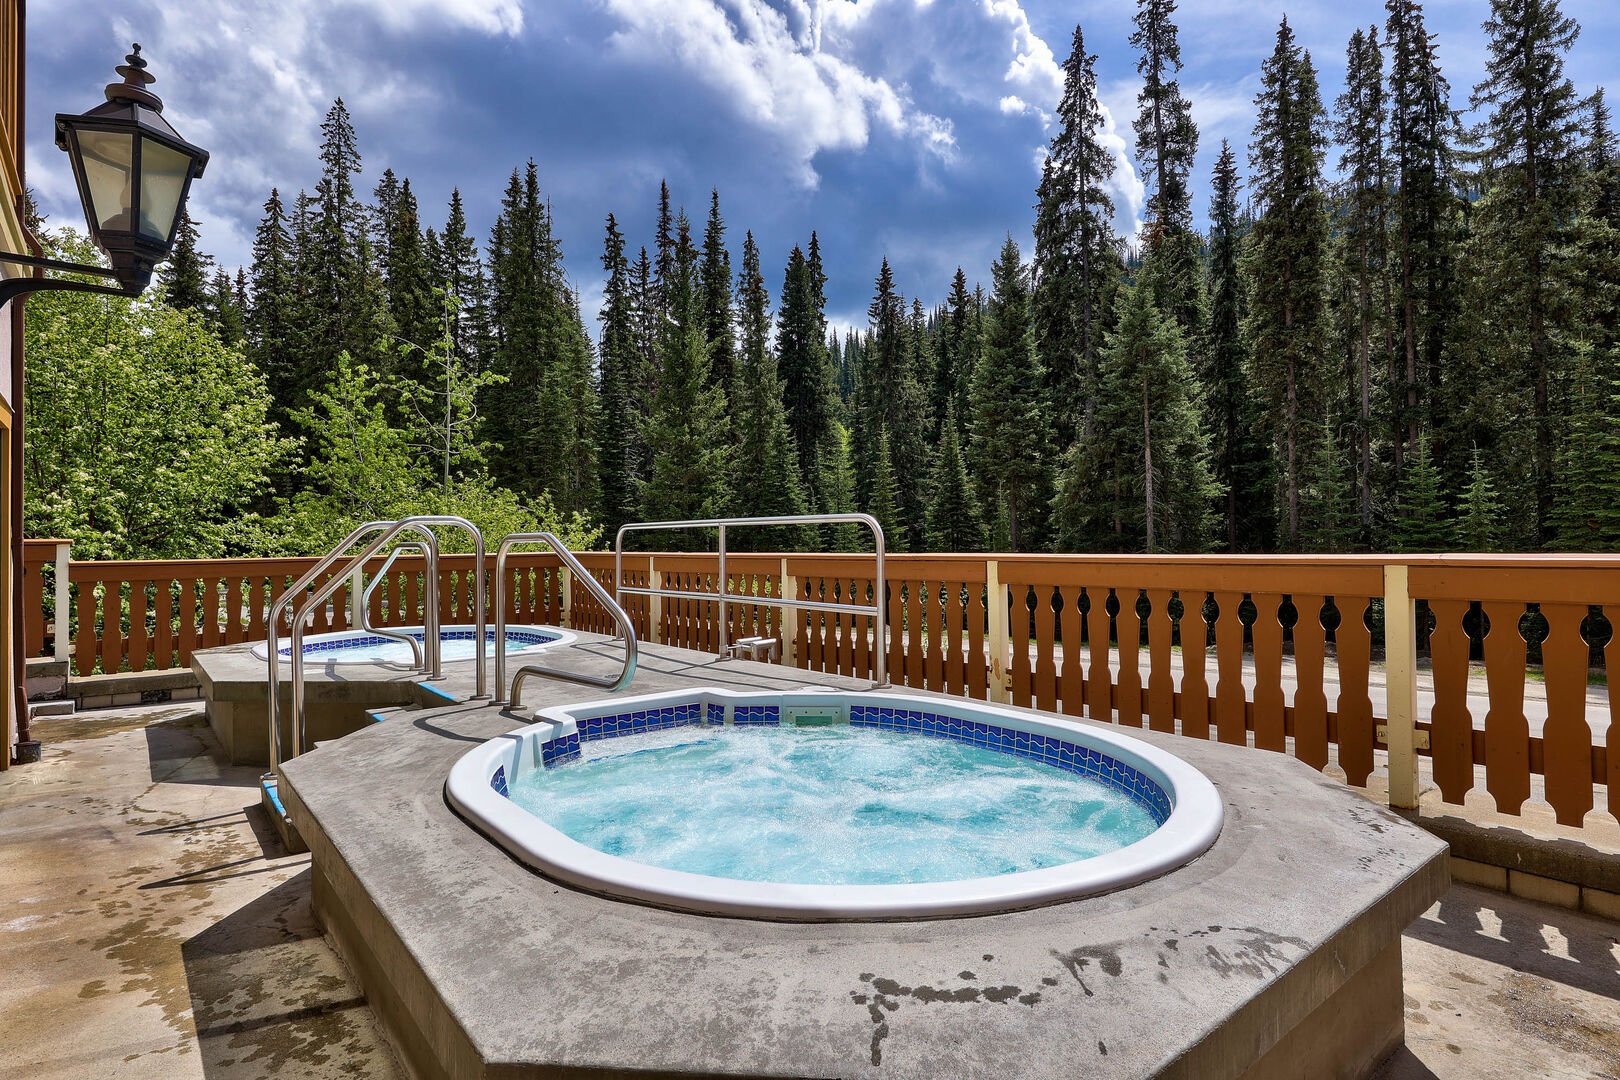 hot tubs in the hearthstone lodge with evergreen trees in the background